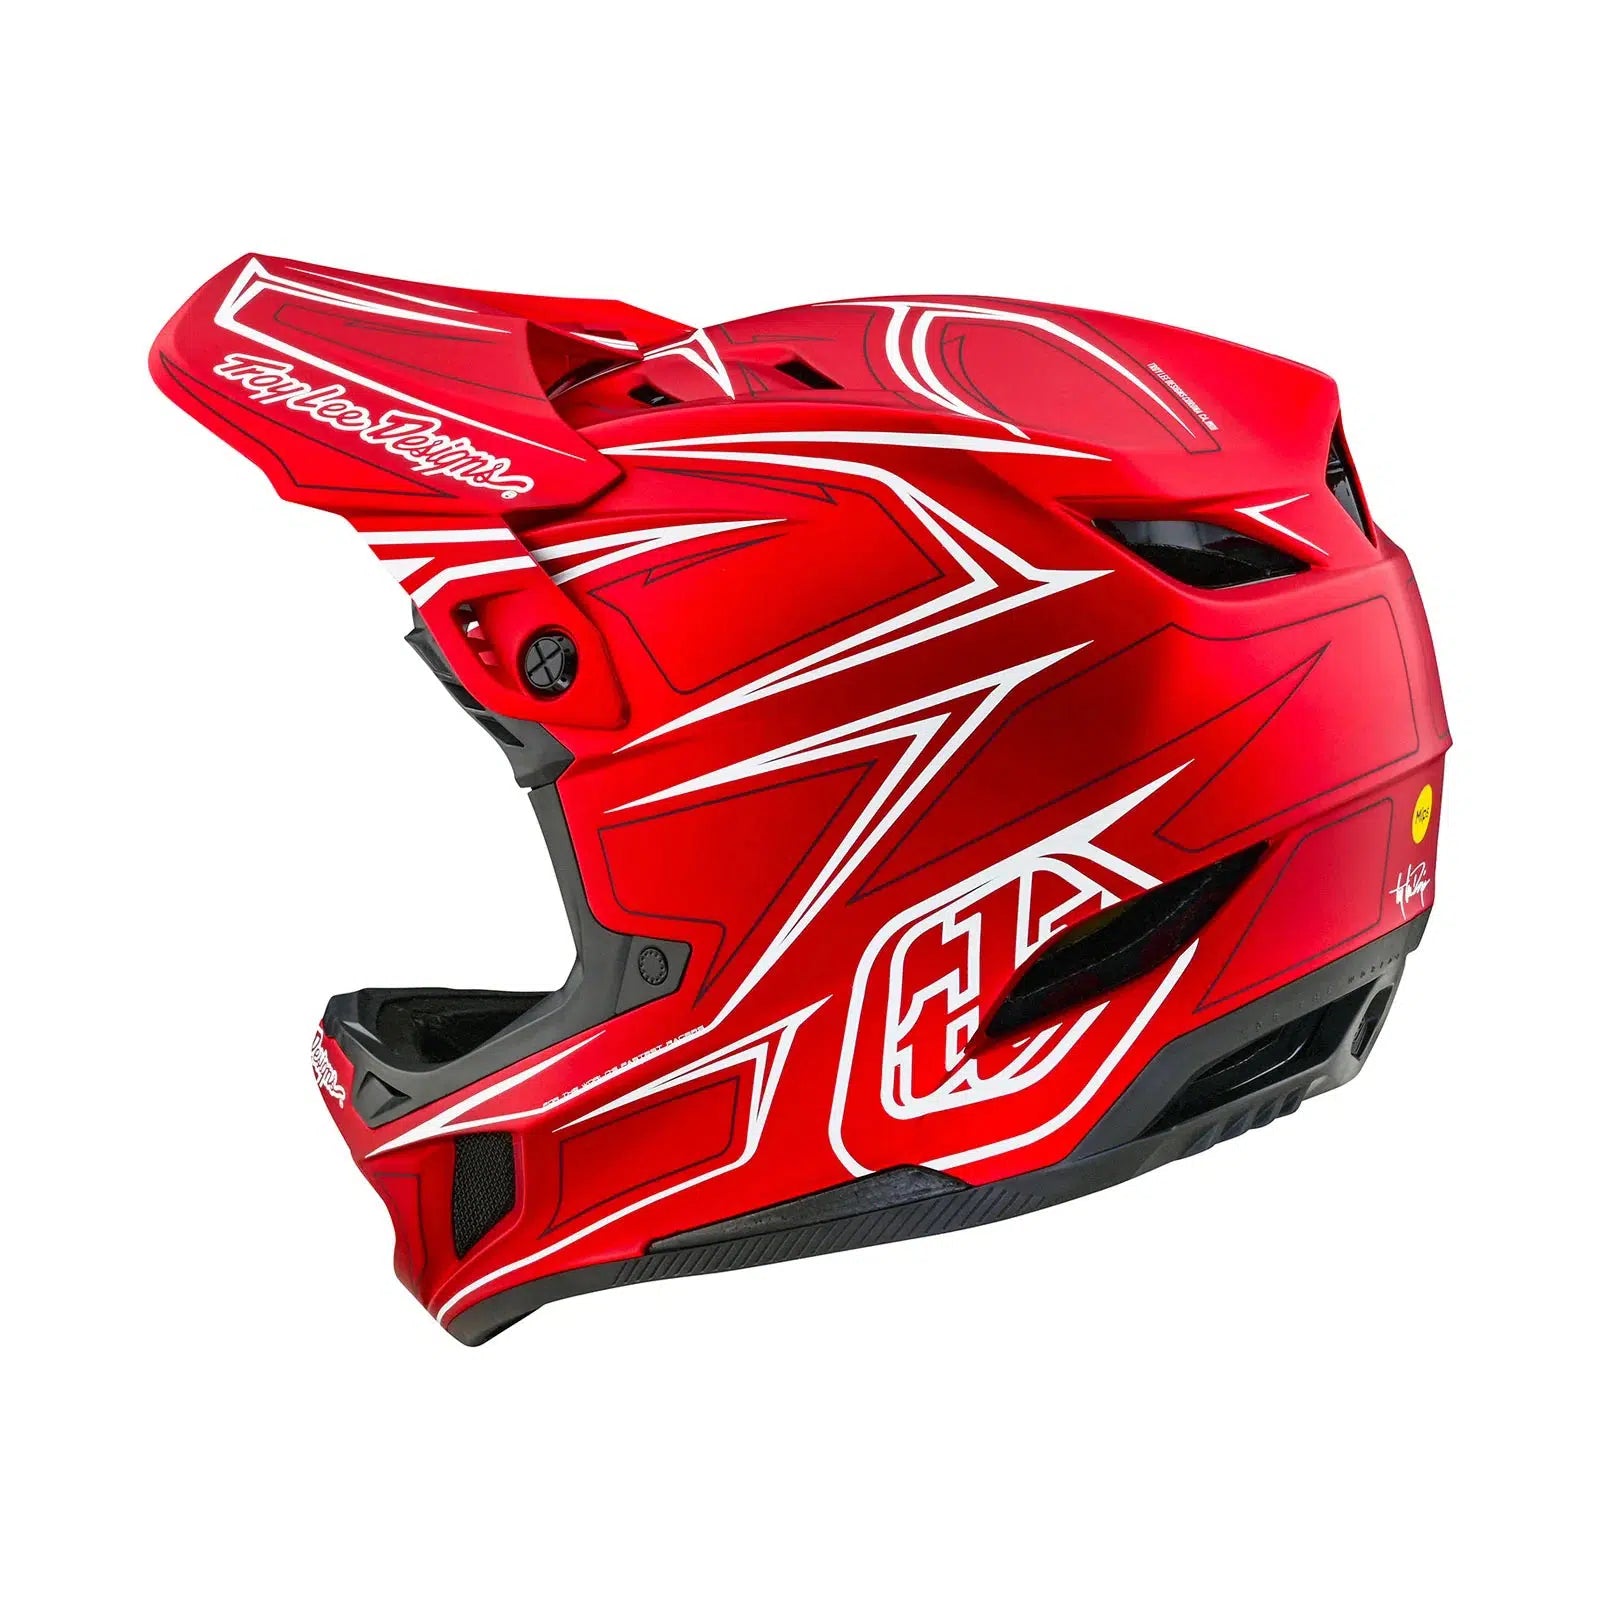 A TLD D4 AS Composite Helmet W/MIPS Pinned Red with a white logo on it, featuring the MIPS C2 protection system for enhanced helmet safety.